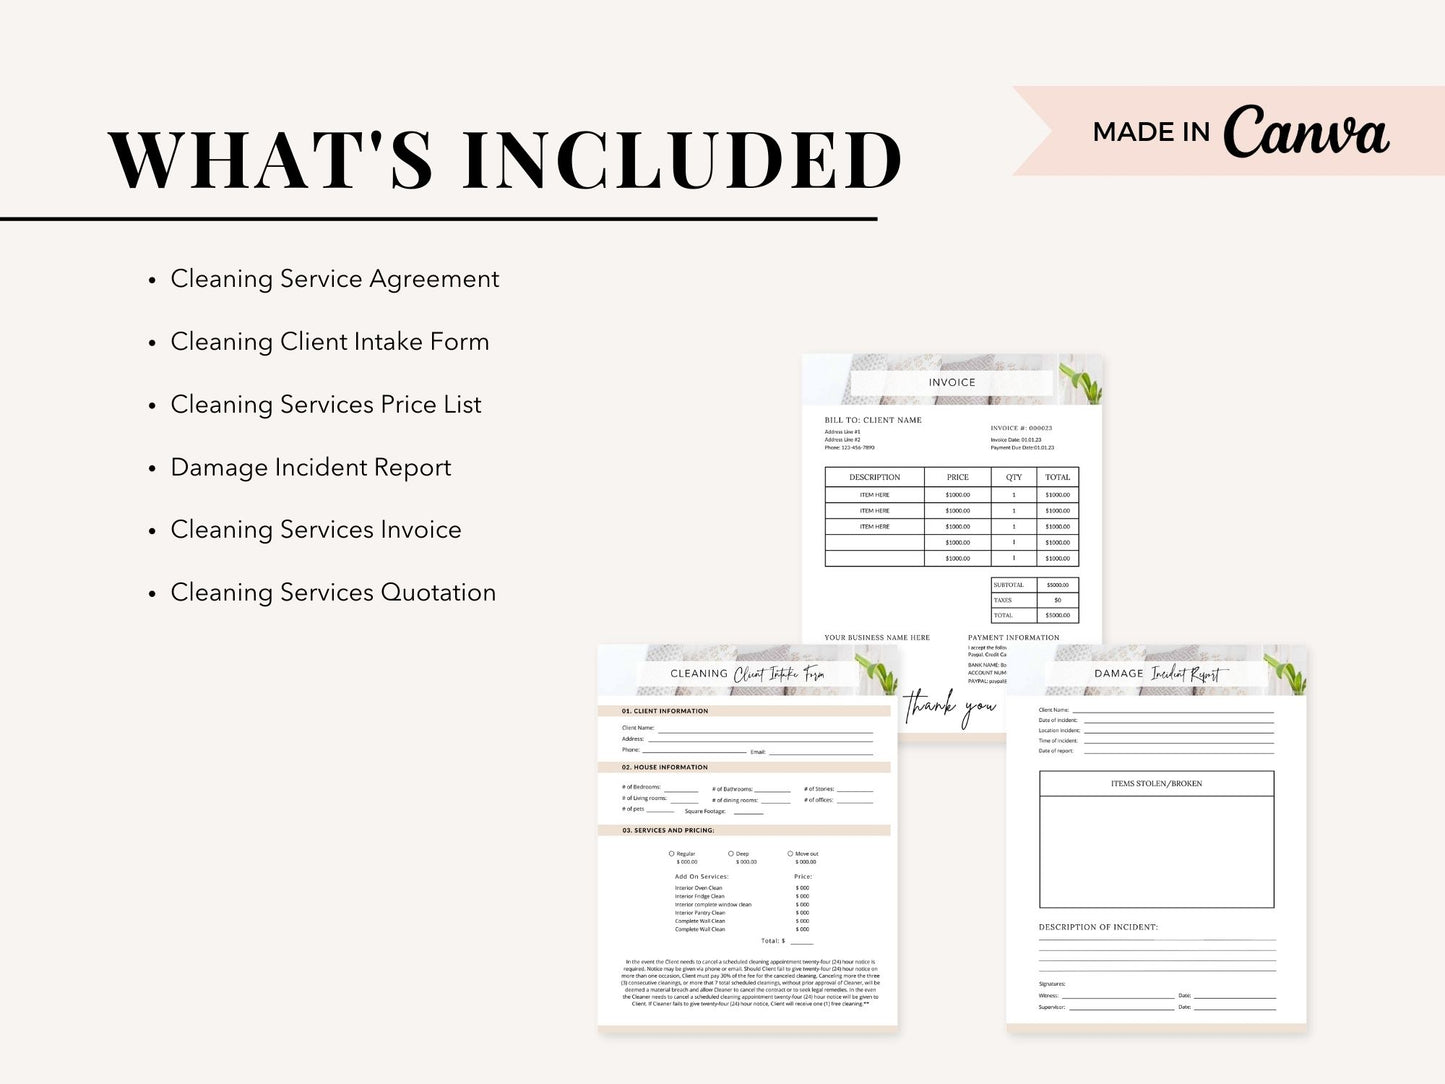 Modern Cleaning Services Form Bundle - Versatile and editable set of cleaning forms for efficient client communication, ensuring a streamlined and organized approach to elevate your cleaning services.